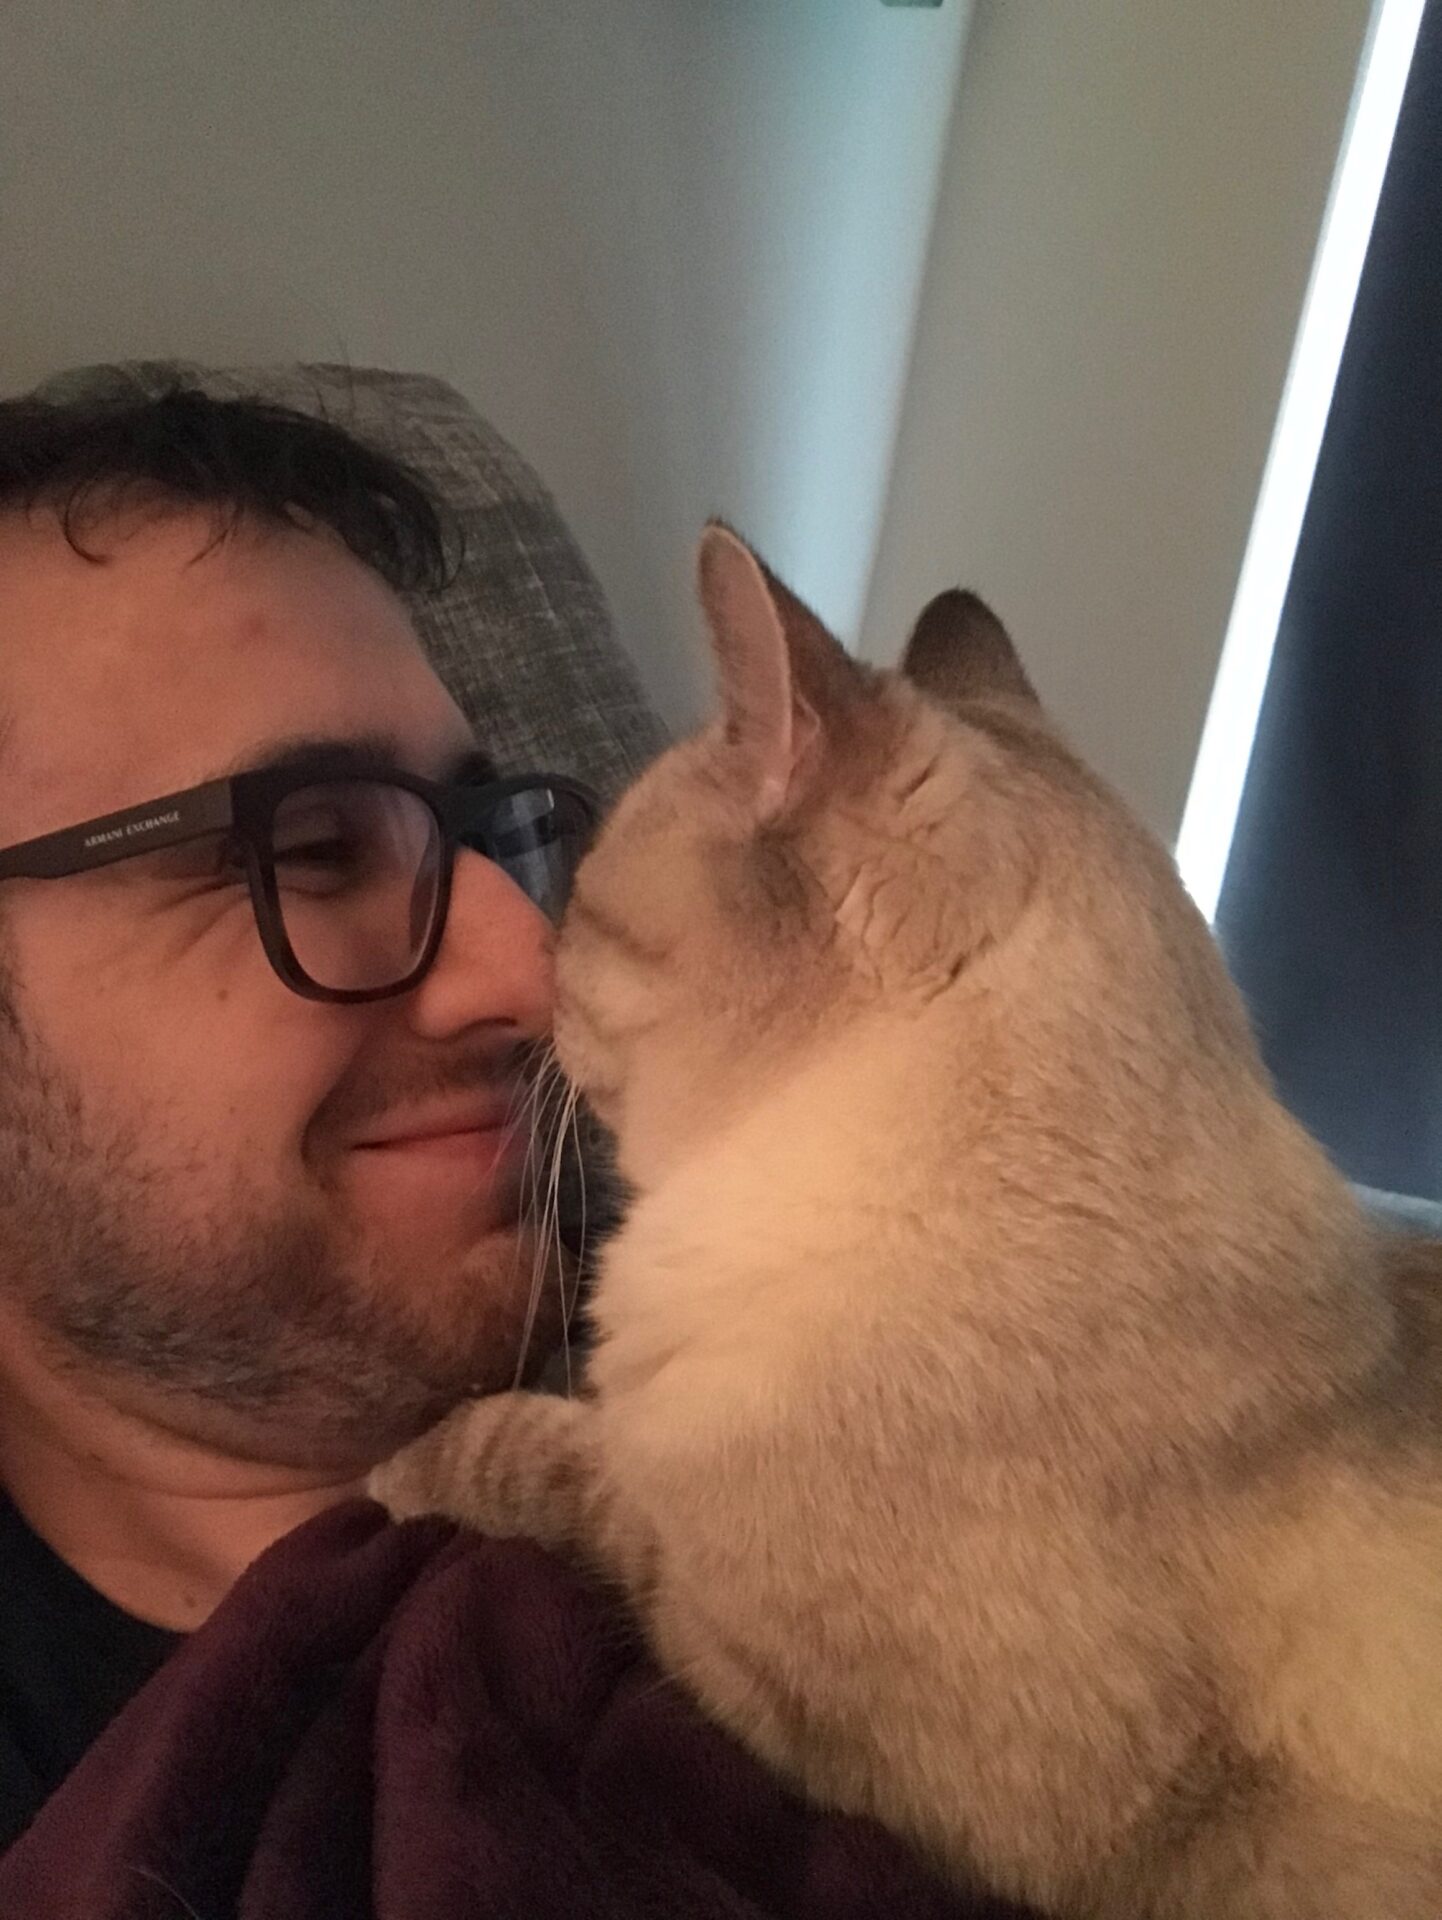 Joey Lusvardi and Zoloft, a lynx point Siamese cat, touch noses. Joey has a silly smile on his face